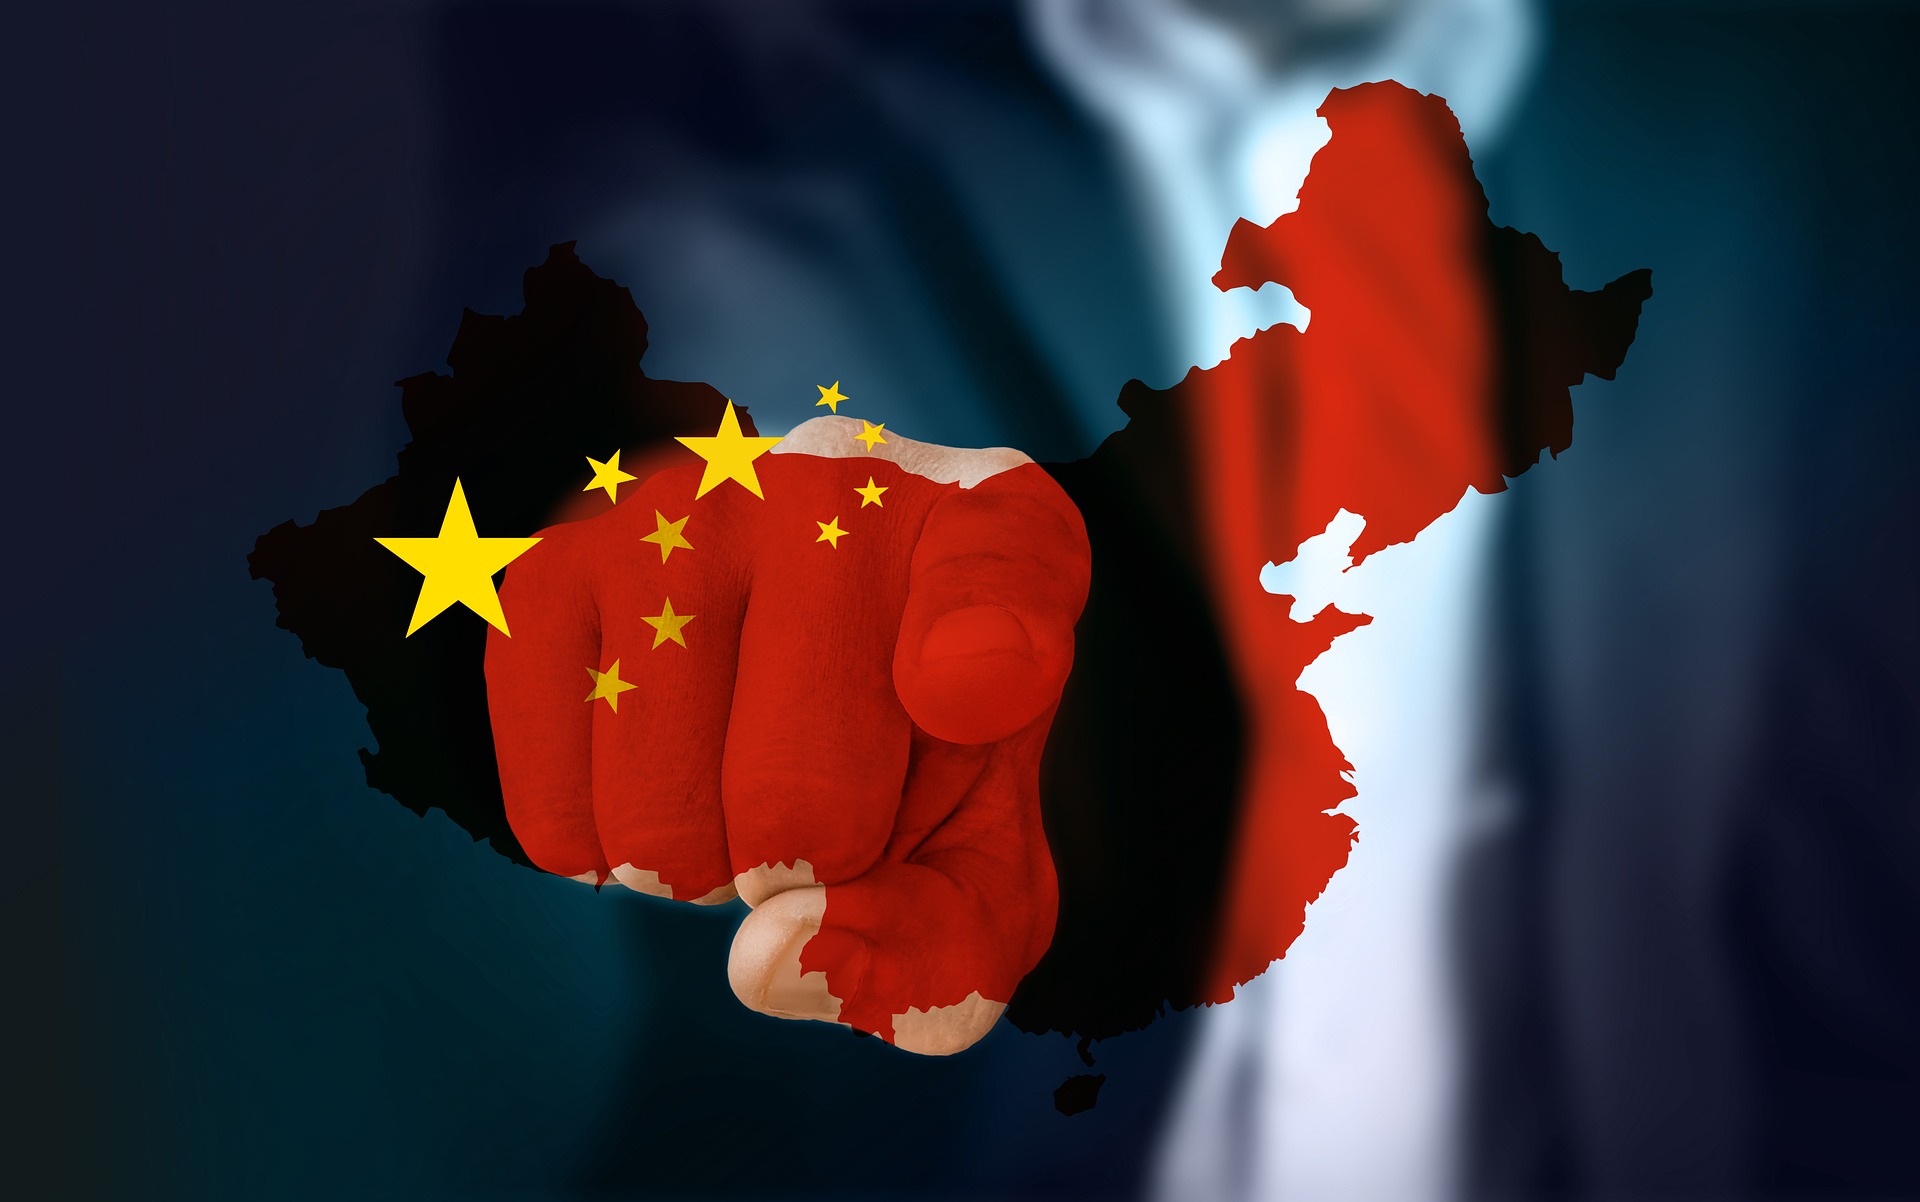 Will international companies take on Chinese censorship after the pandemic?